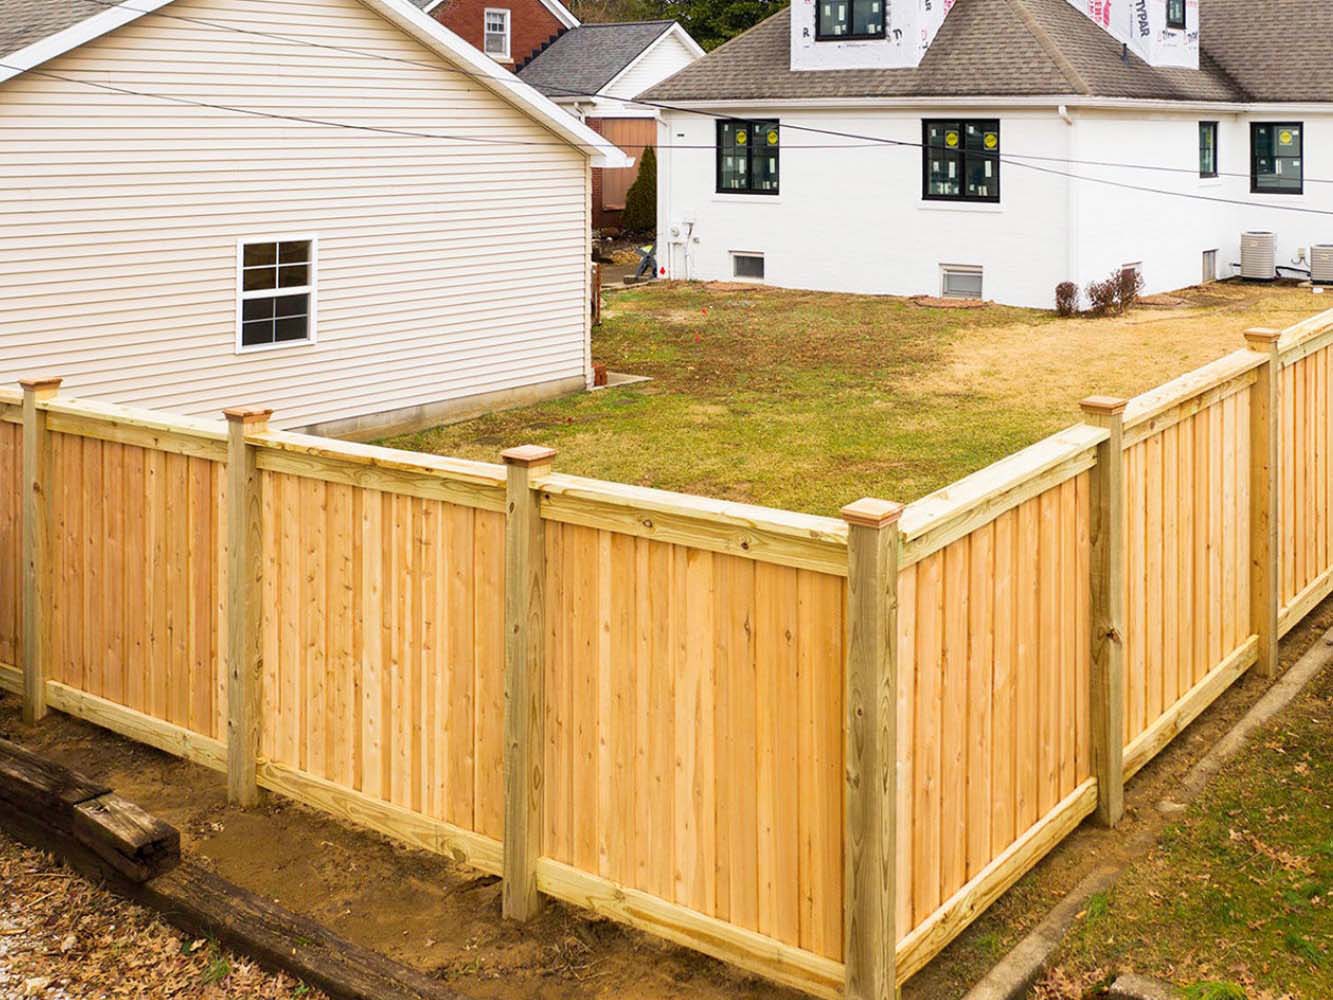 Oakland City IN cap and trim style wood fence